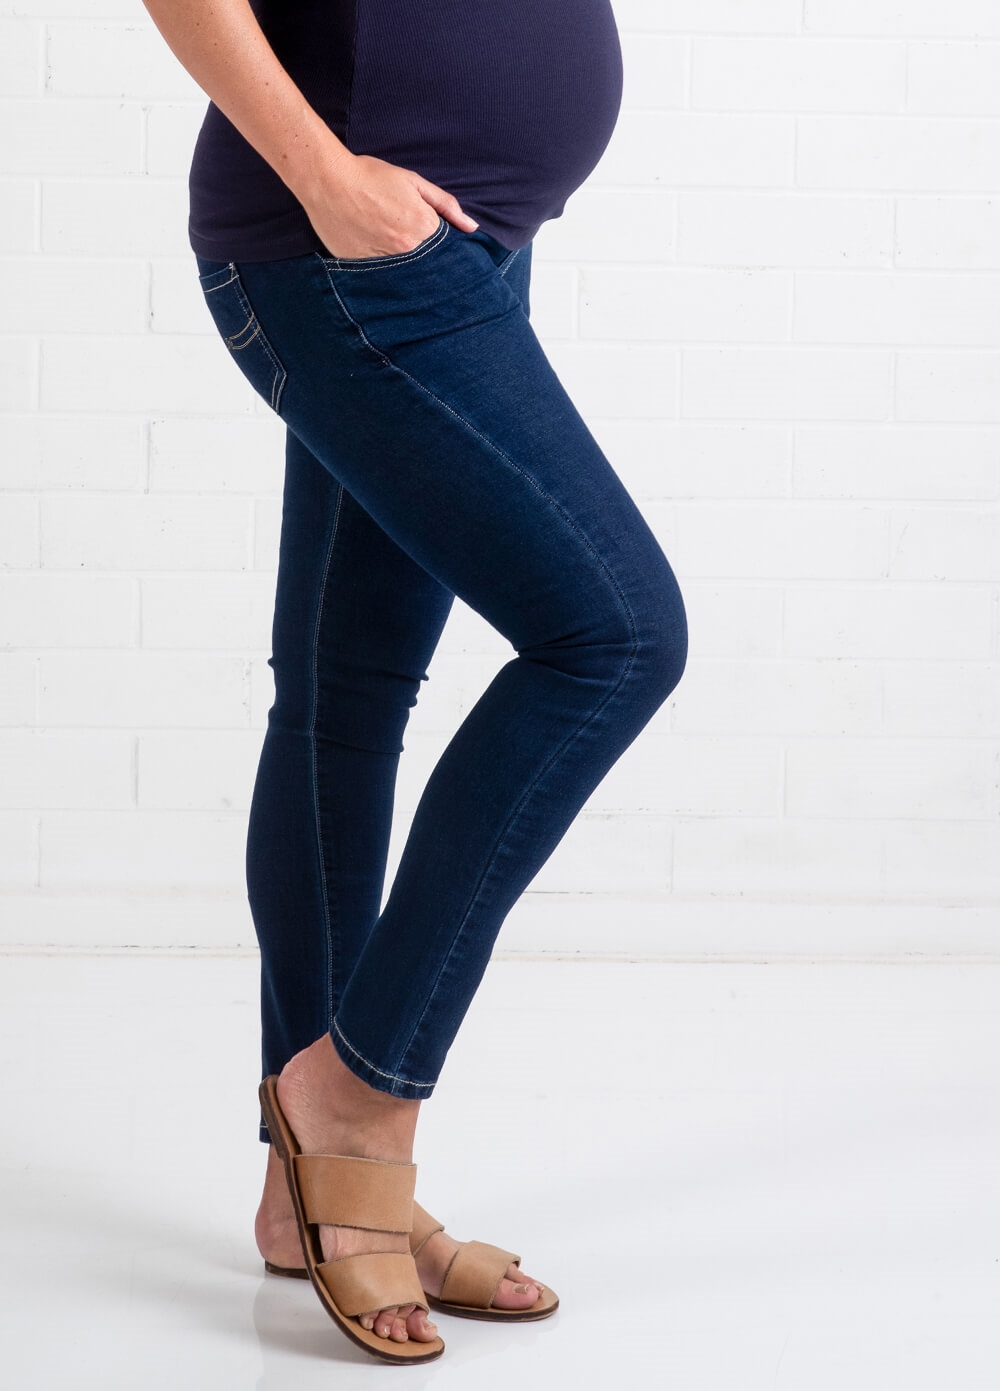 Lait & Co - Christophe Ankle Jeans in Blue